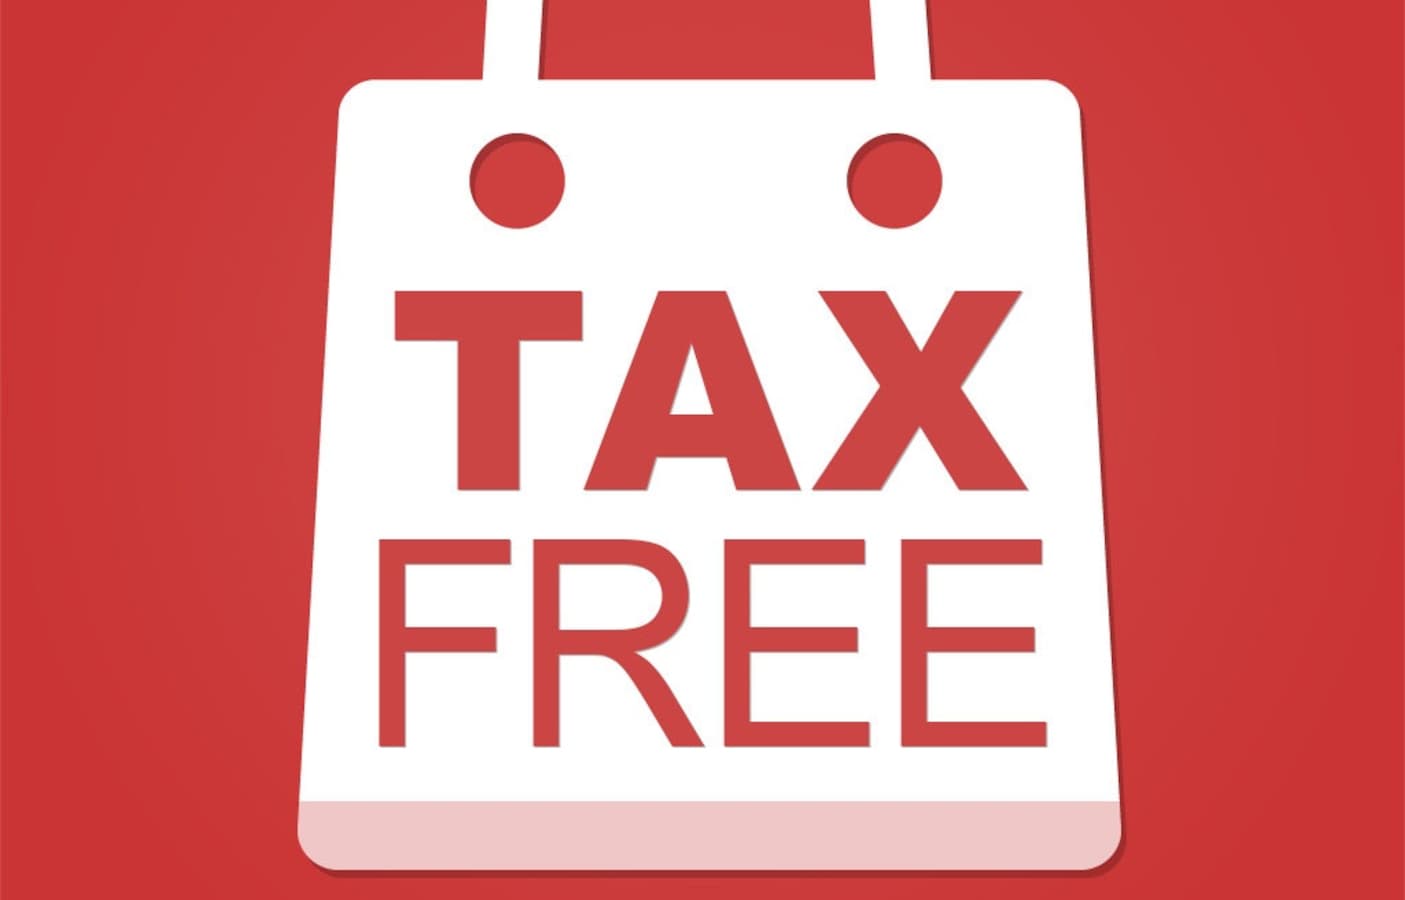 5-tax-free-shopping-facts-all-about-japan